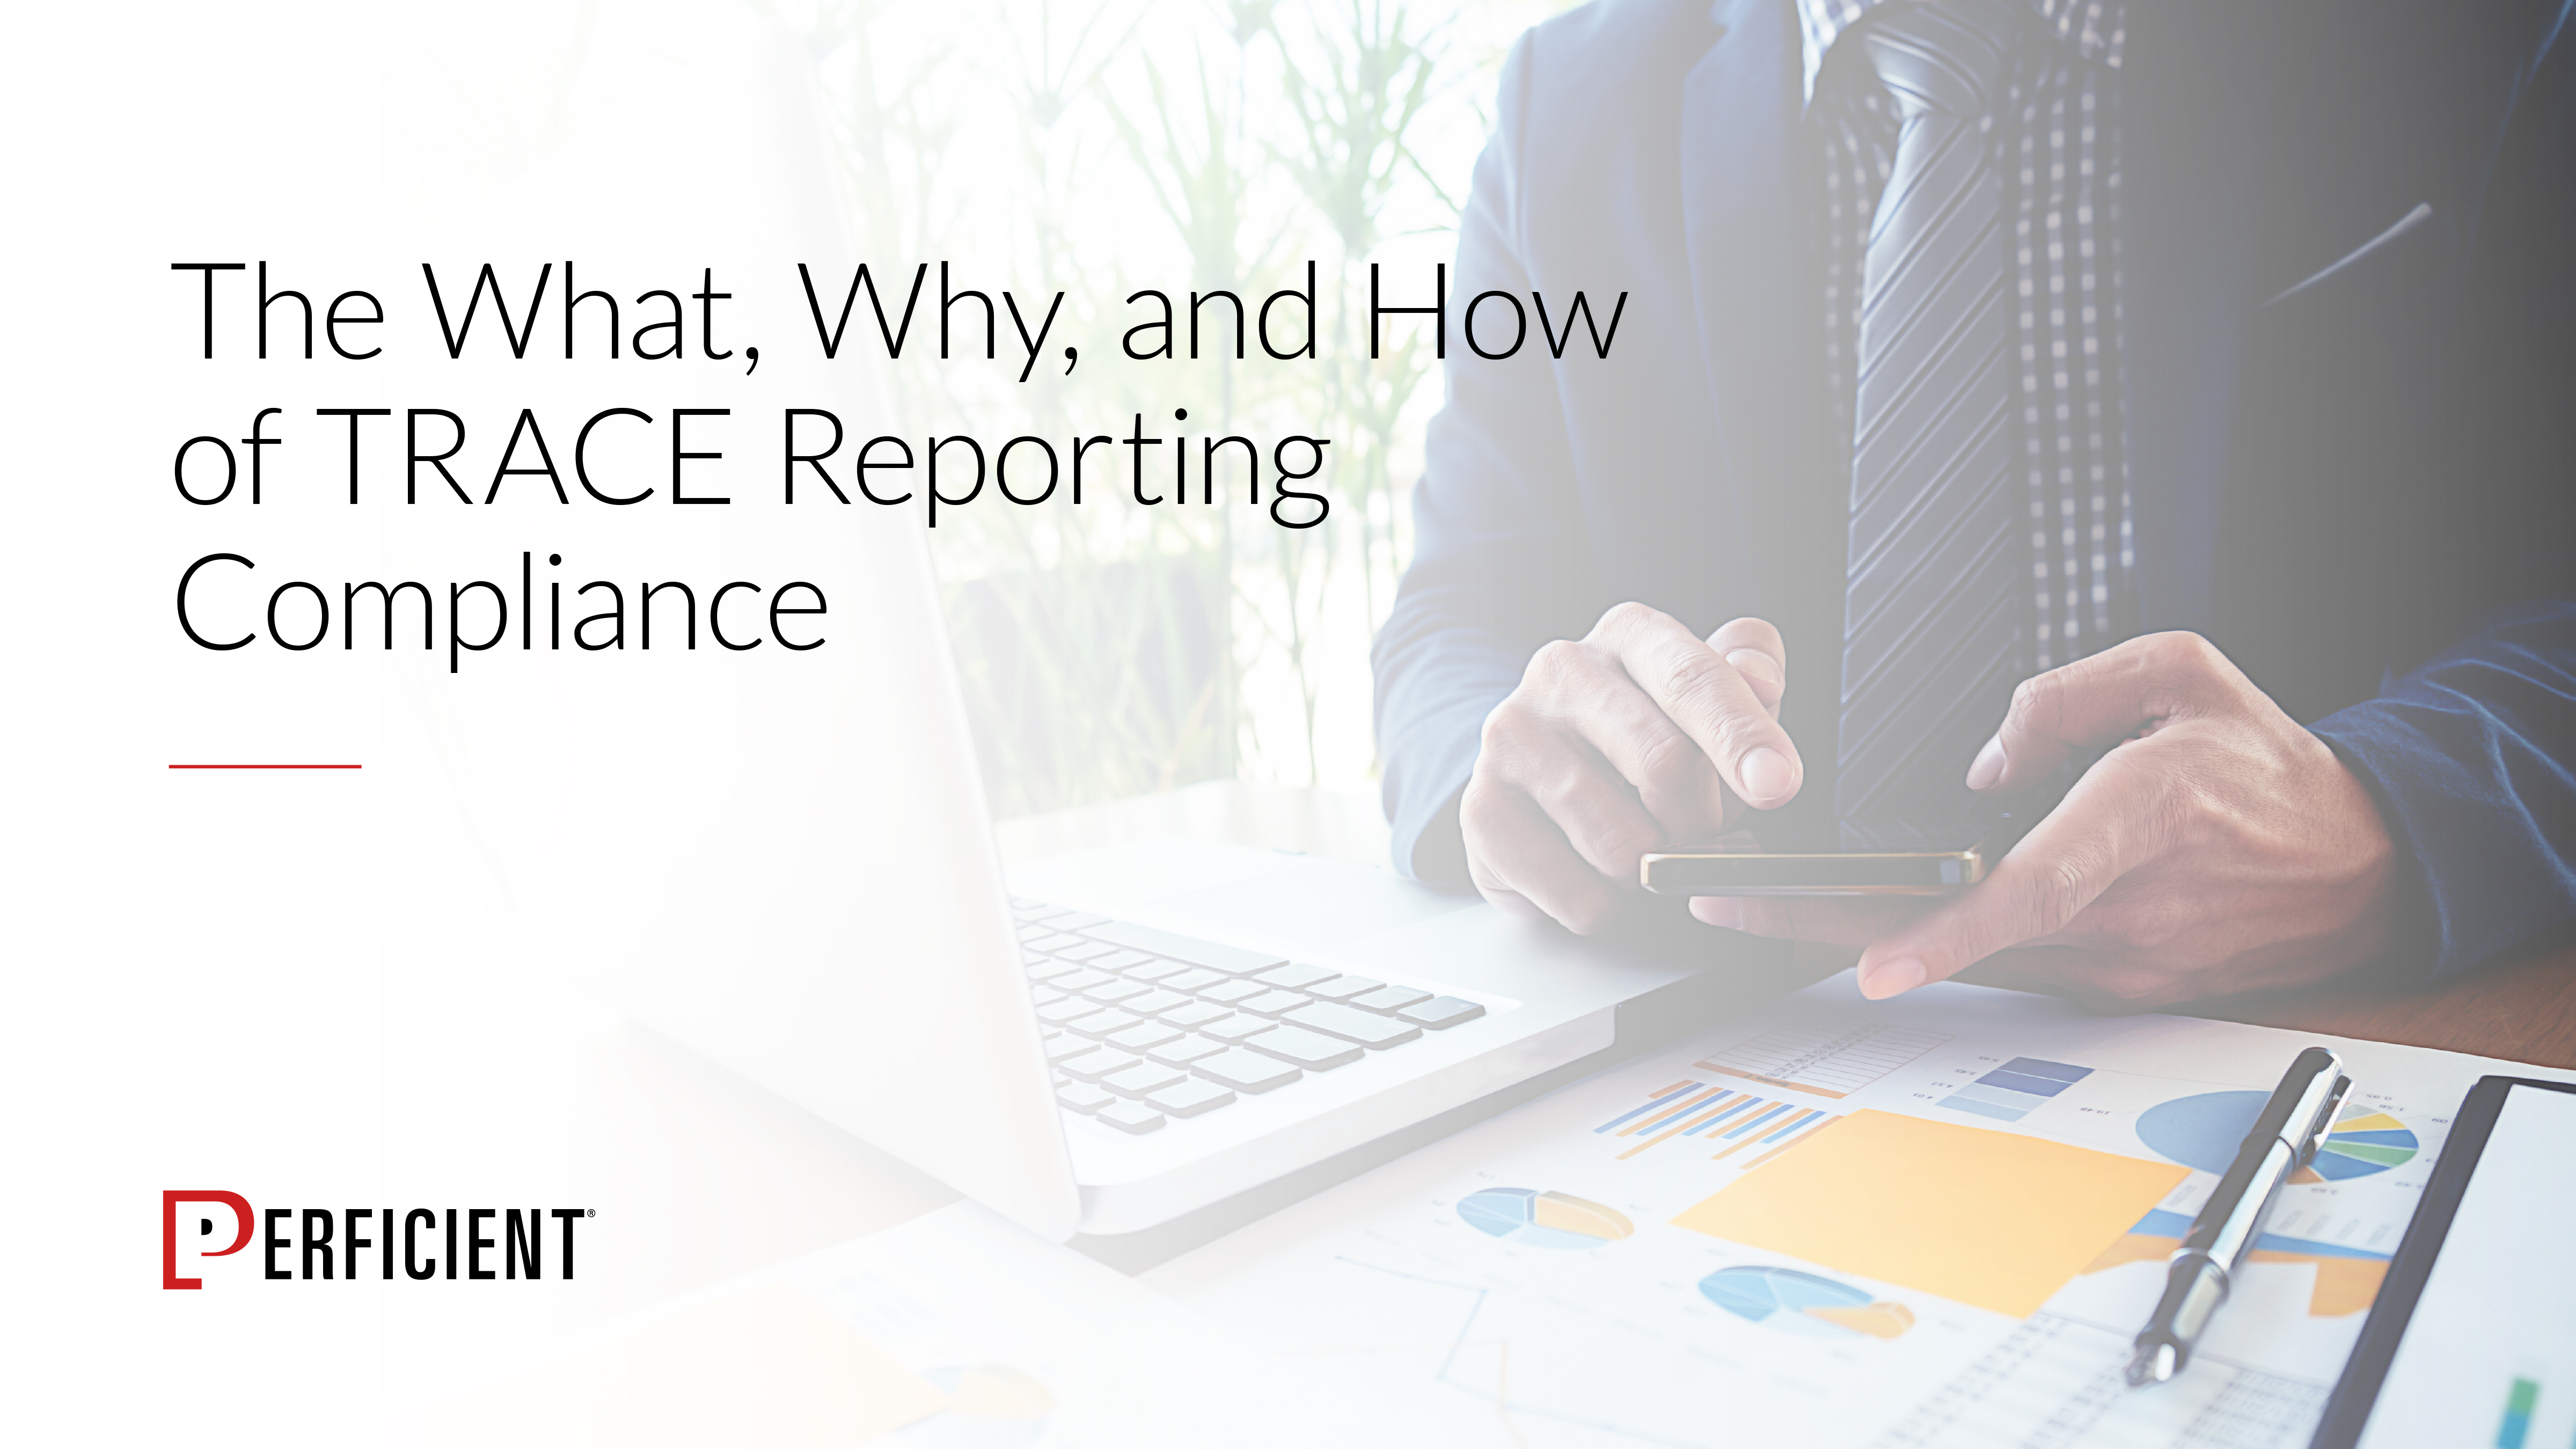 Guide Cover- The What, Why, and How of TRACE Reporting Compliance.